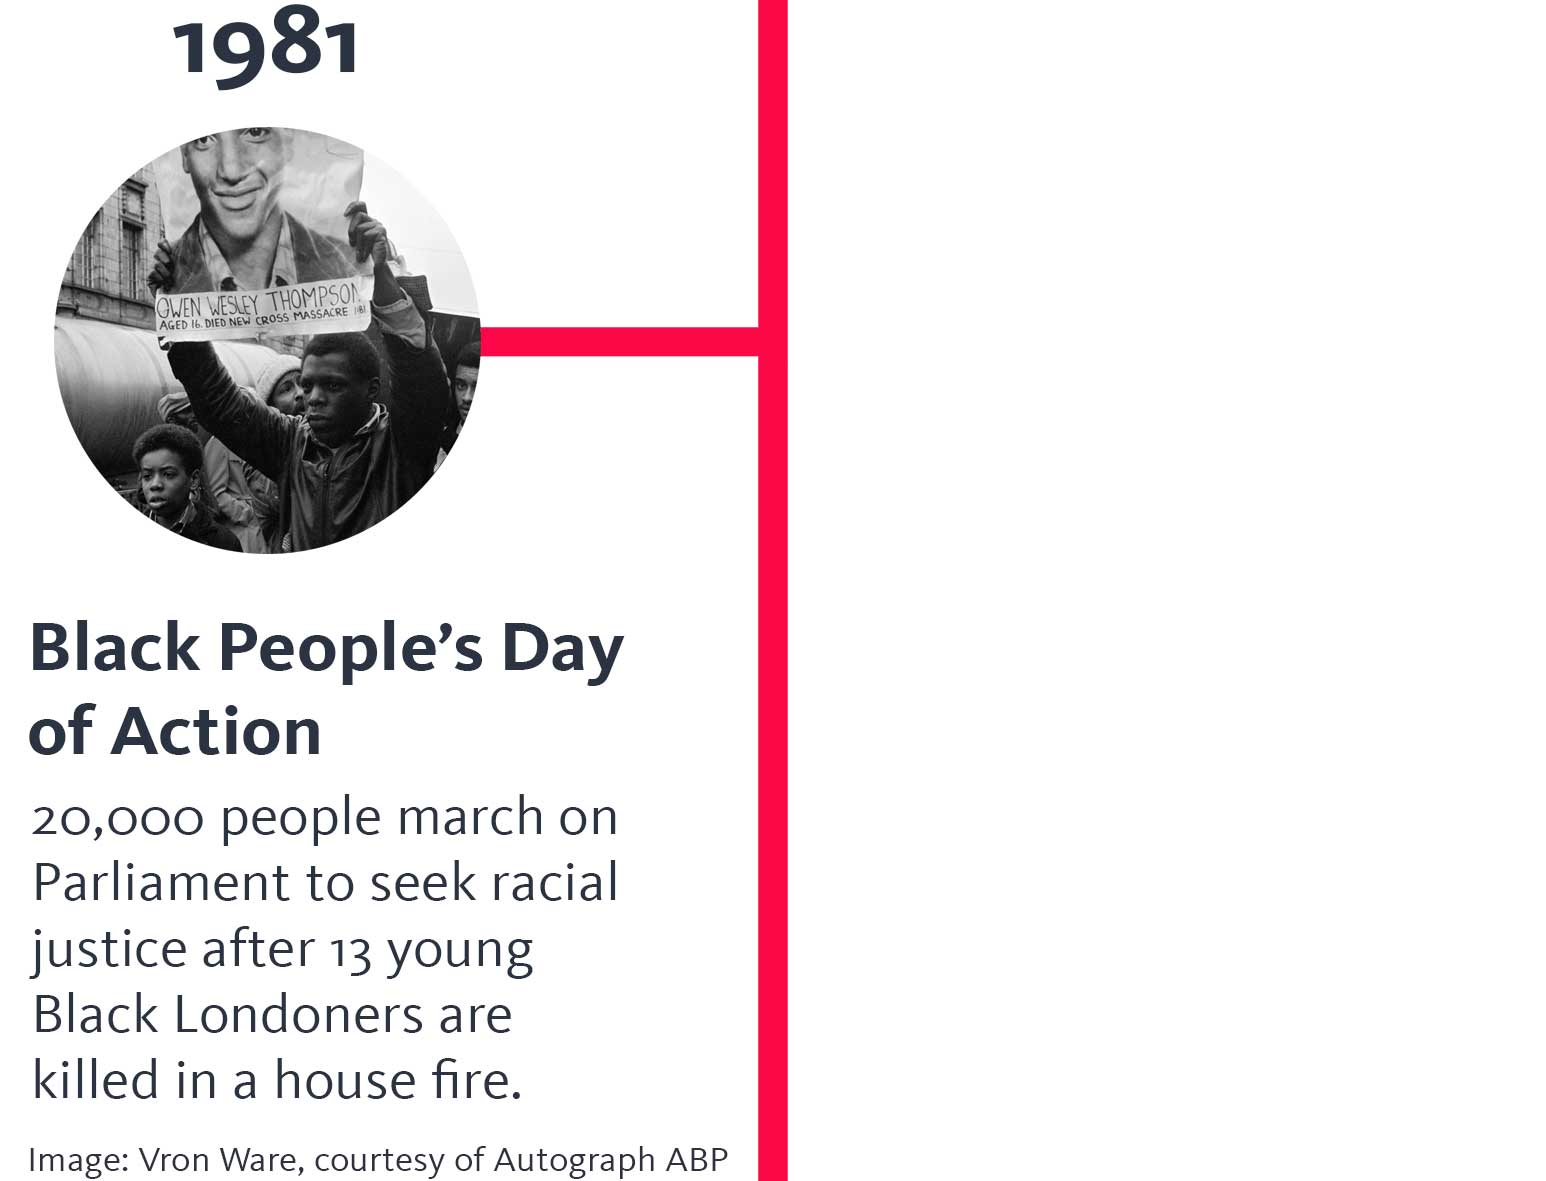 The year '1981' appears above a photo of a young man holding a placard with a defiant expression on his face. A heading below says 'Black People's Day of Action', and text below that says 'Twenty-thousand people march on Parliament to seek racial justice after 13 young Black Londoners are killed in a house fire.' and below that, 'Image: Vron Ware, courtesy of Autograph ABP'.